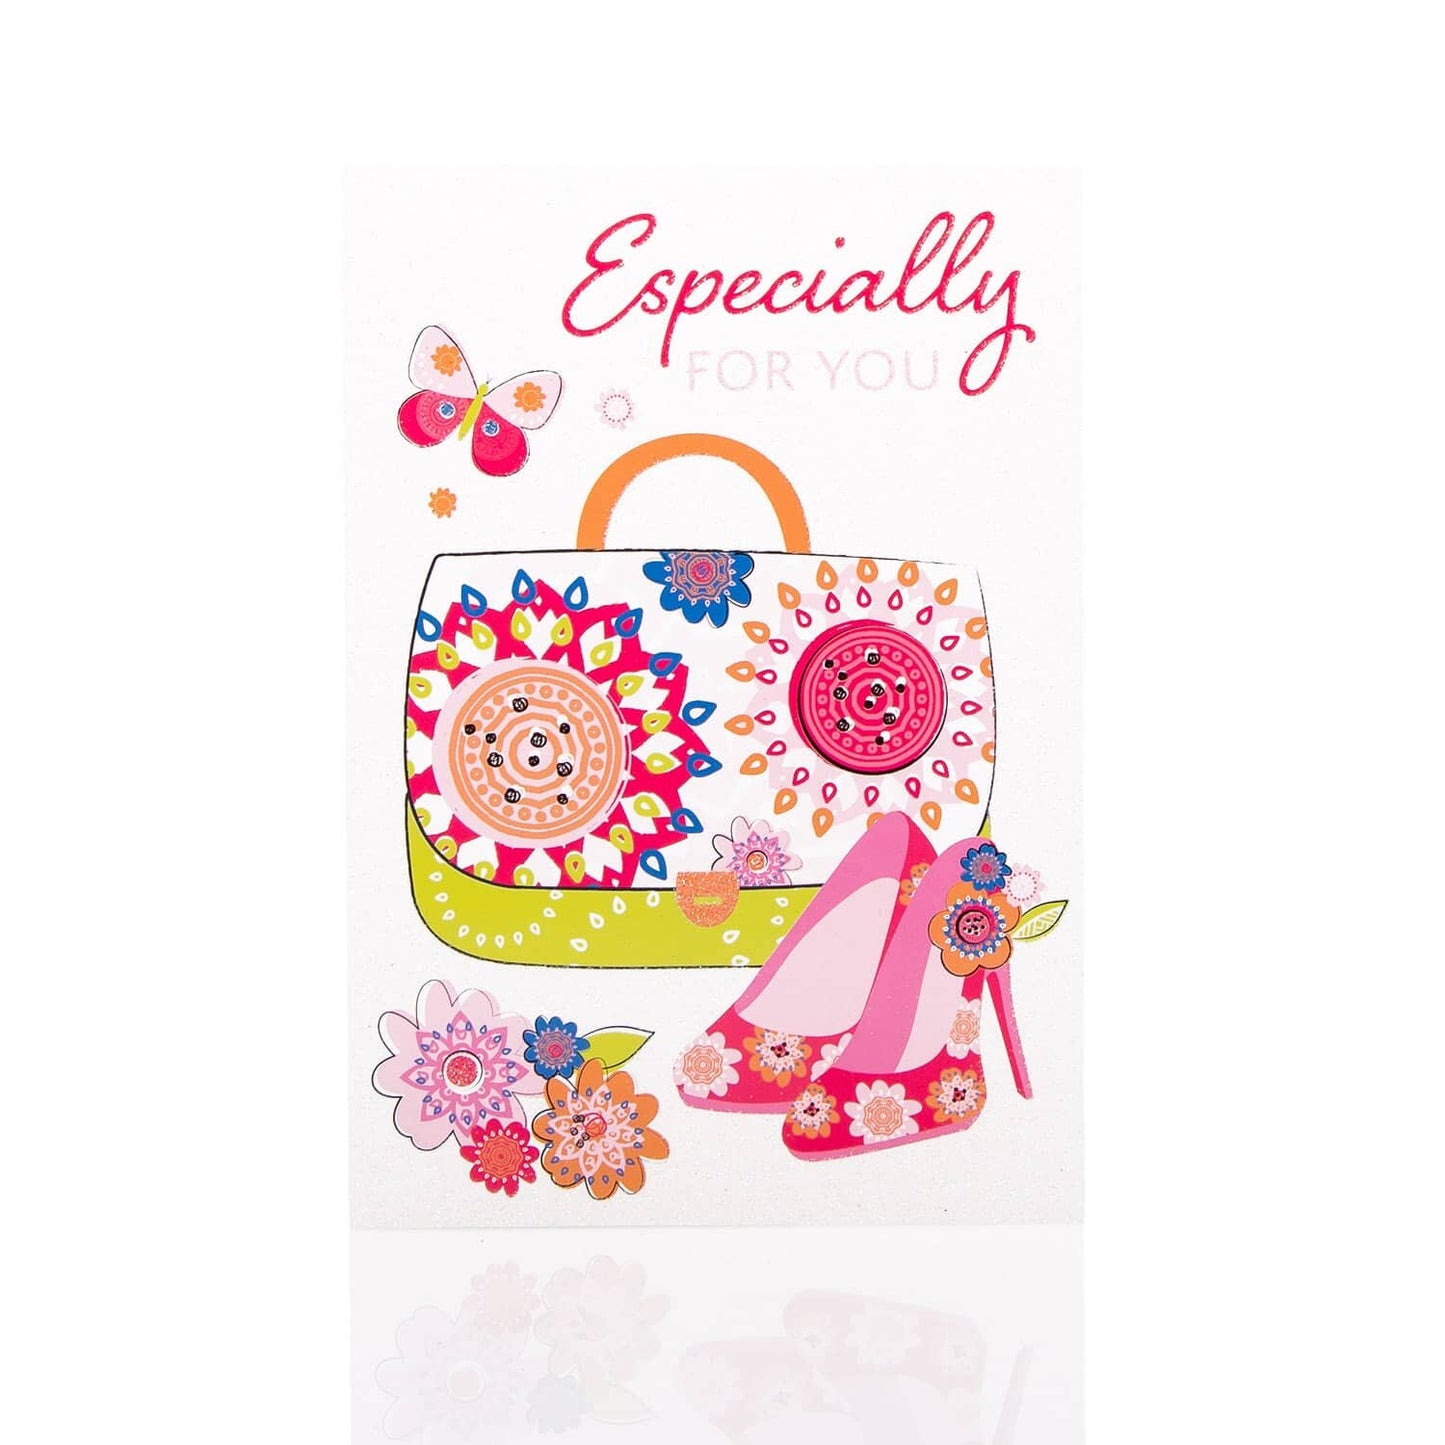 Especially For You Shoe & Bag Greeting Card